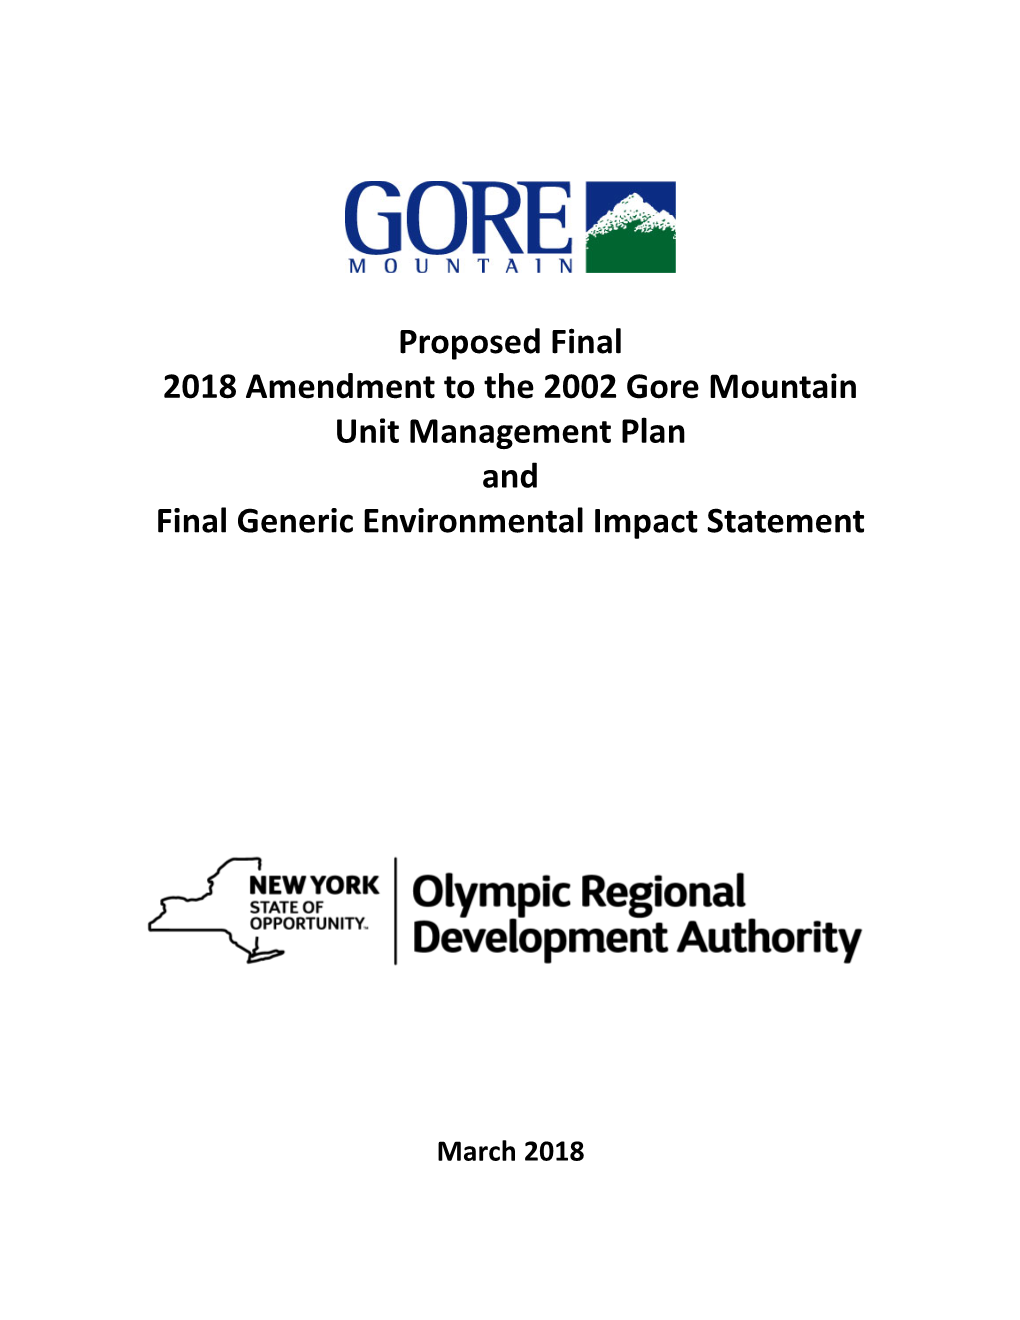 Proposed Final 2018 Amendment to the 2002 Gore Mountain Unit Management Plan and Final Generic Environmental Impact Statement